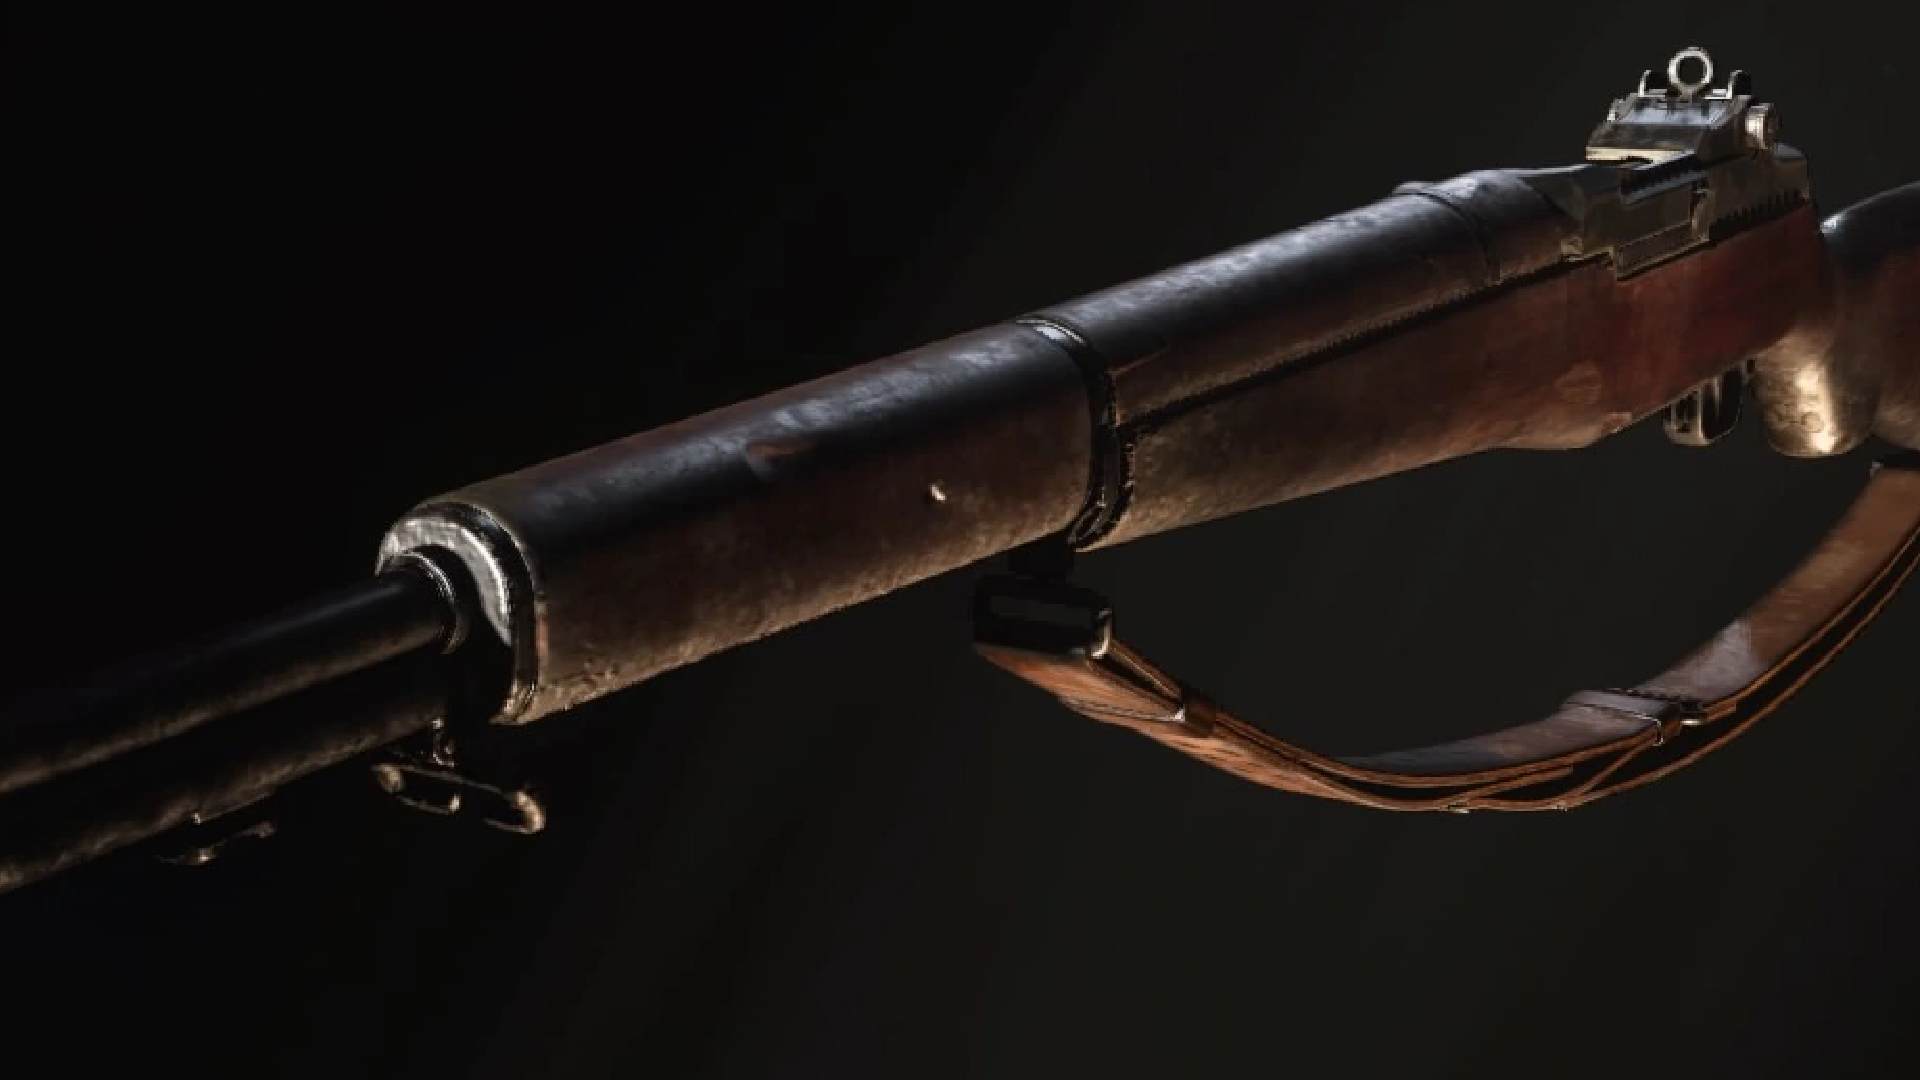 CoD Vanguard launch weapons: The M1 Garand as pictured in a previous Call of Duty game. 